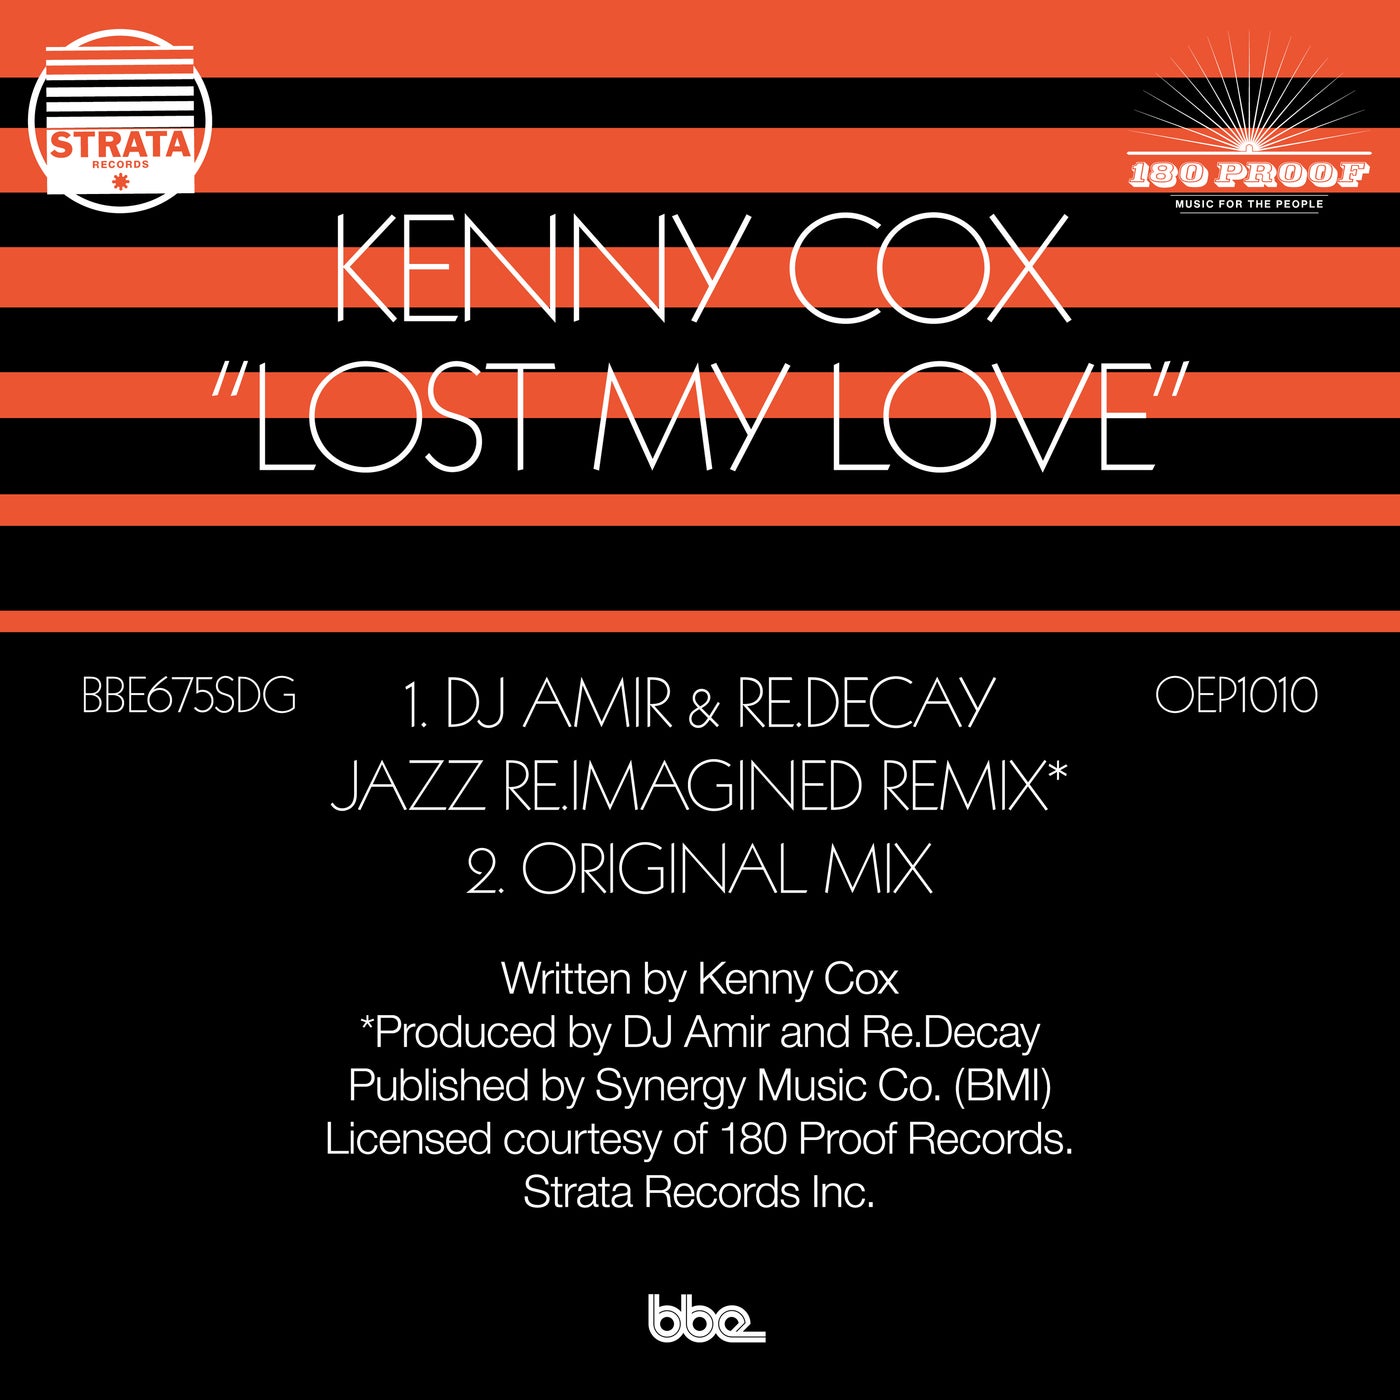 Lost My Love (DJ Amir & Re.decay Jazz Re.Imagined Remix)